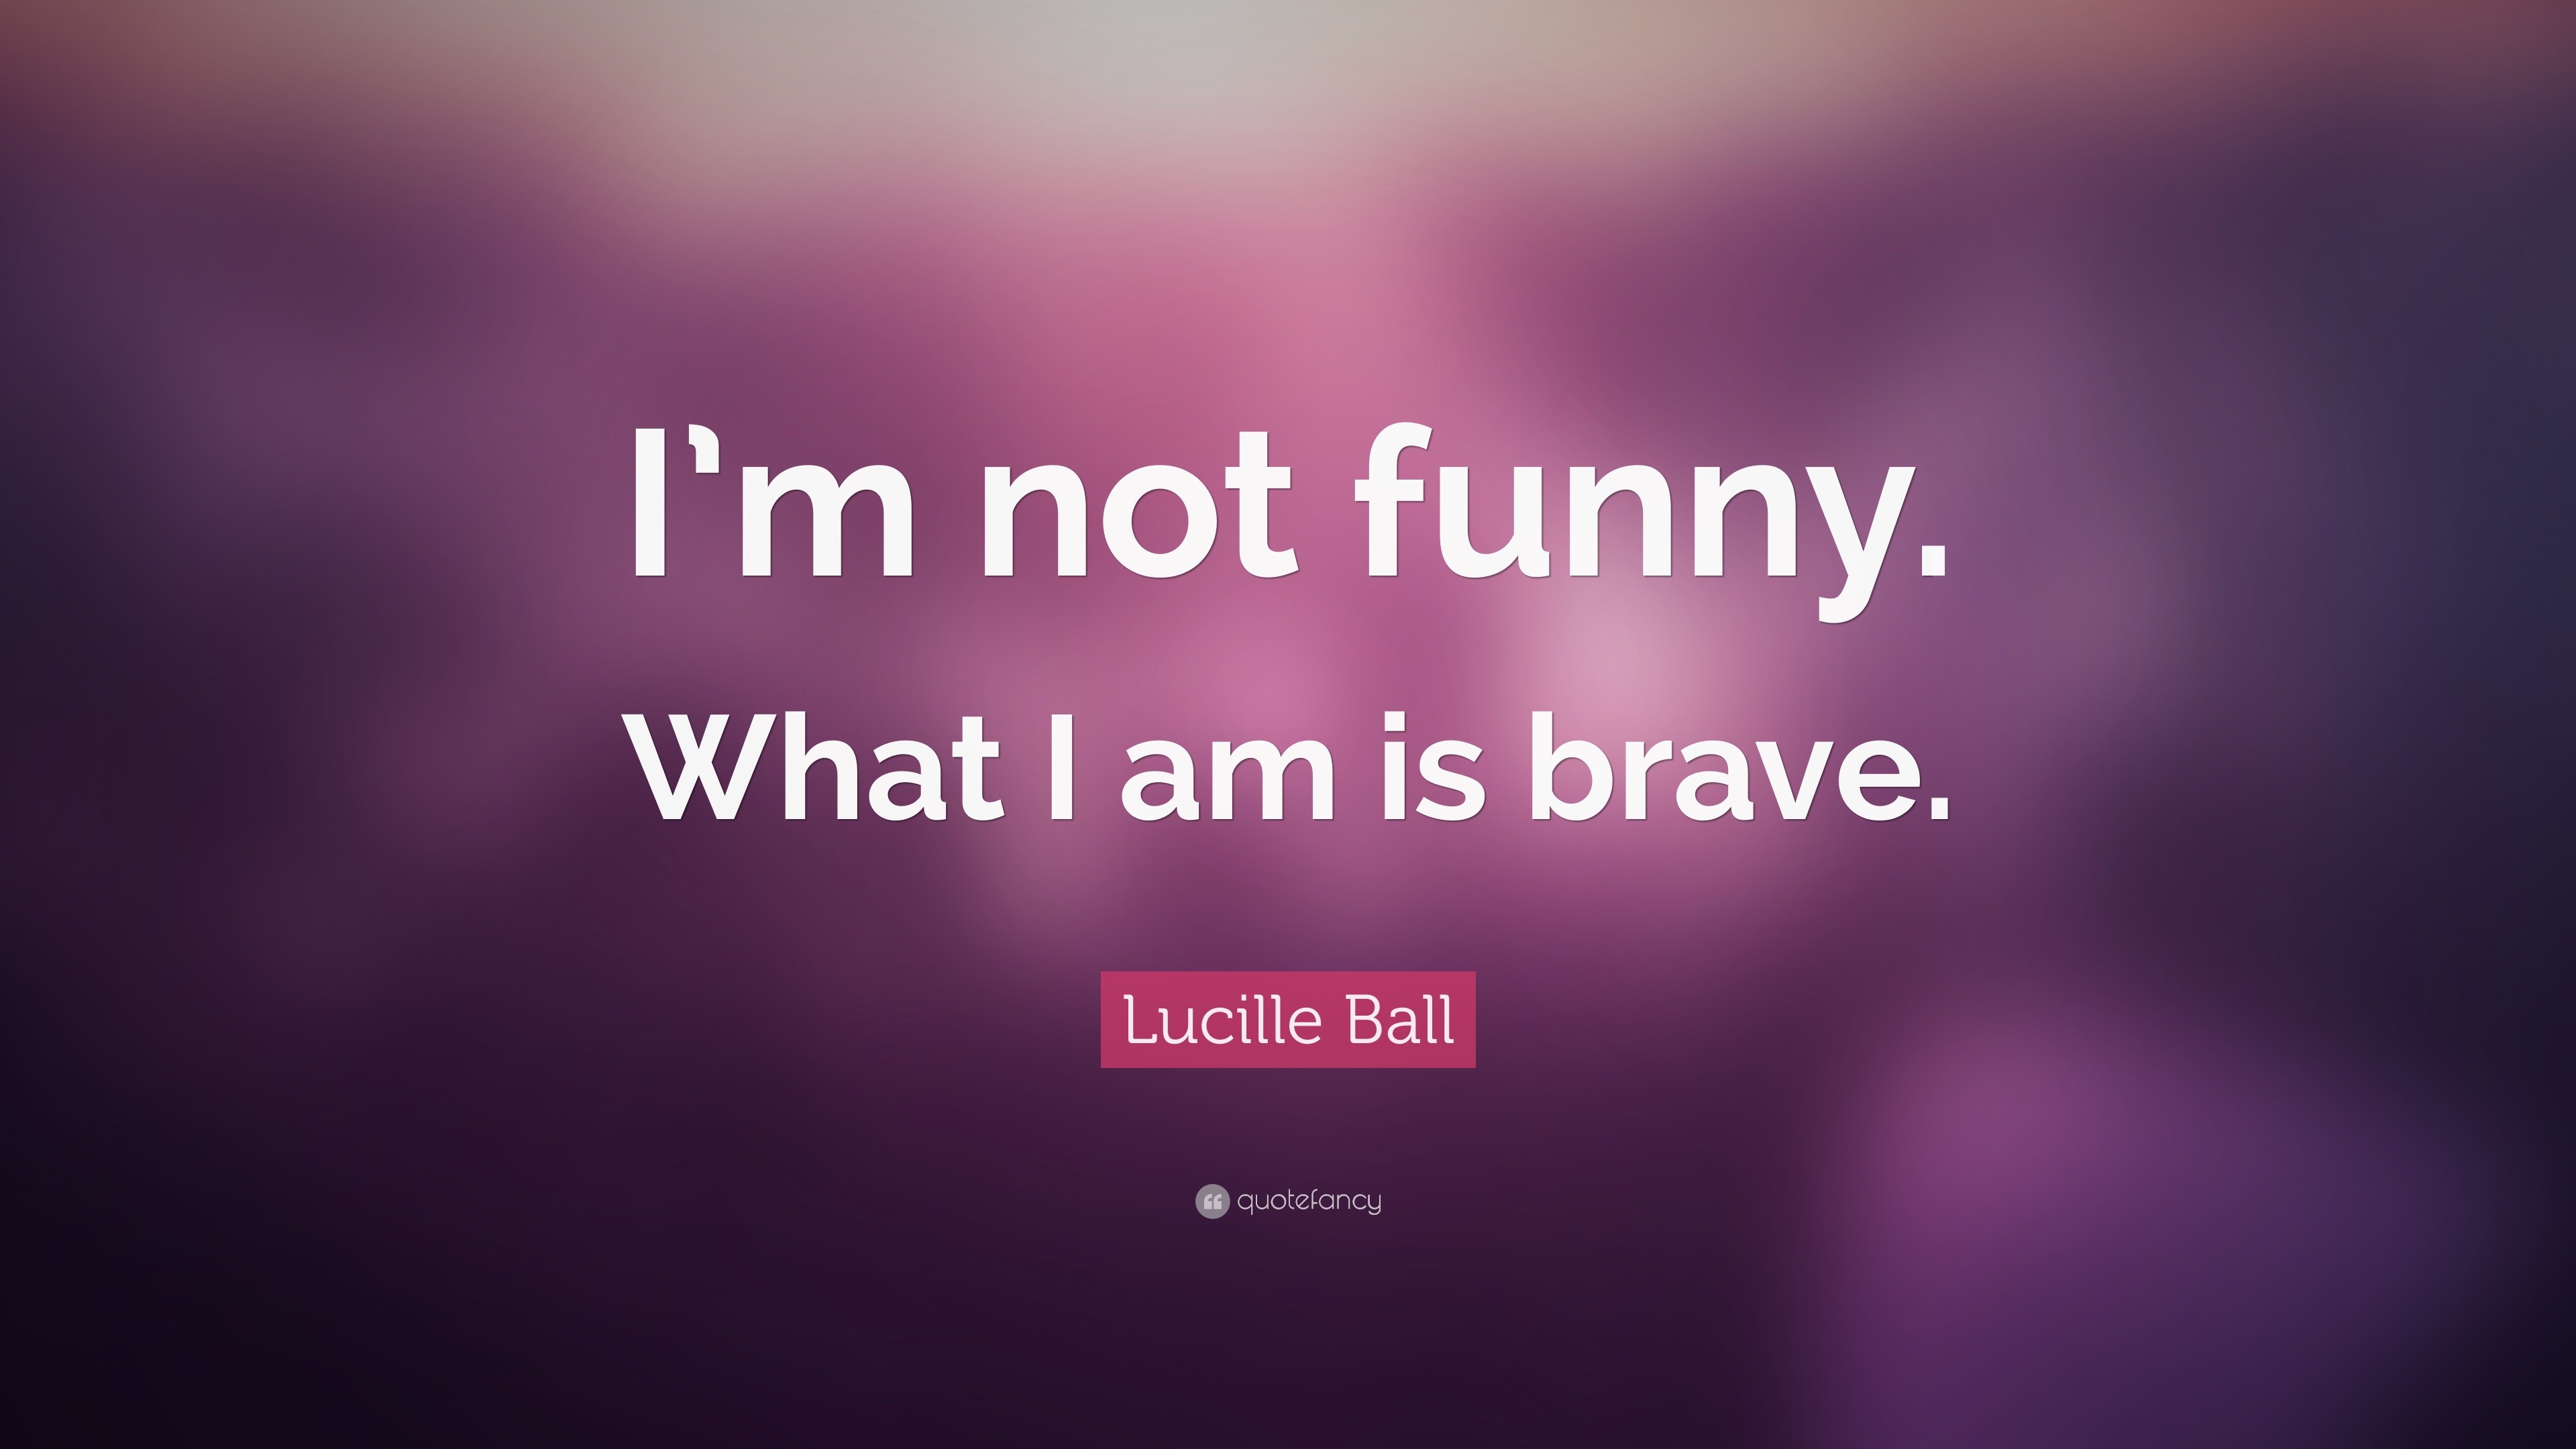 Lucille Ball Quote: “I'm not funny. What I am is brave.”